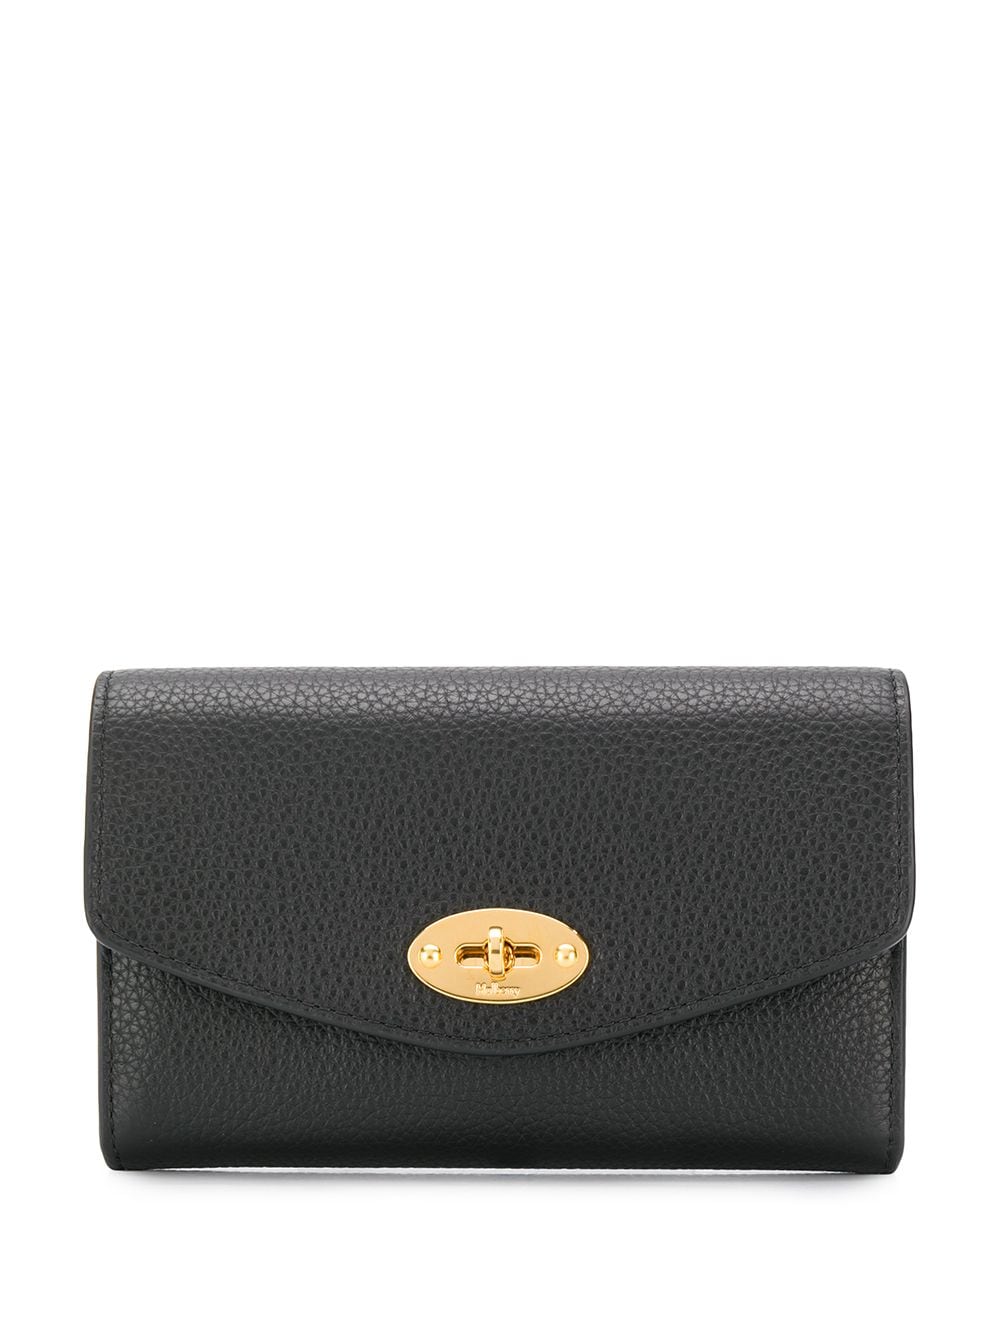 Image 1 of Mulberry Darley medium classic wallet